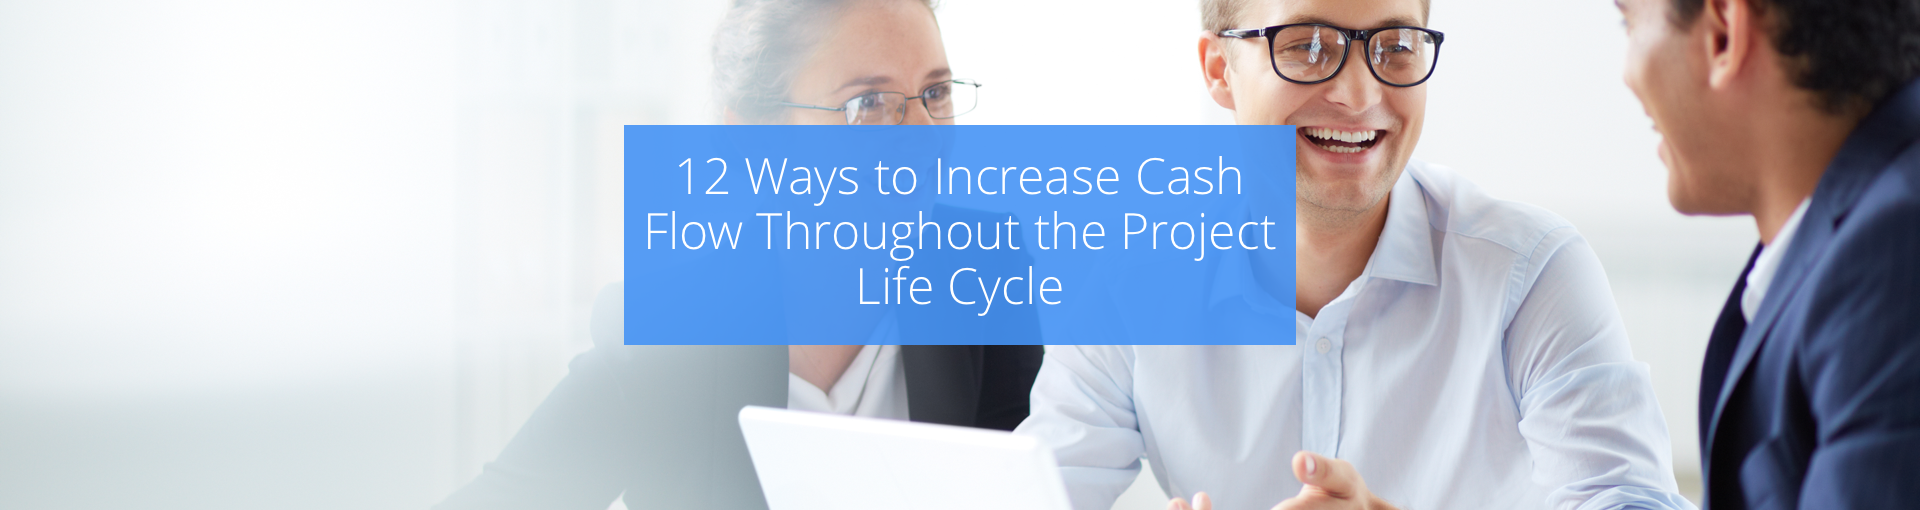 12 Ways to Increase Cash Flow Throughout the Project Life Cycle Featured Image